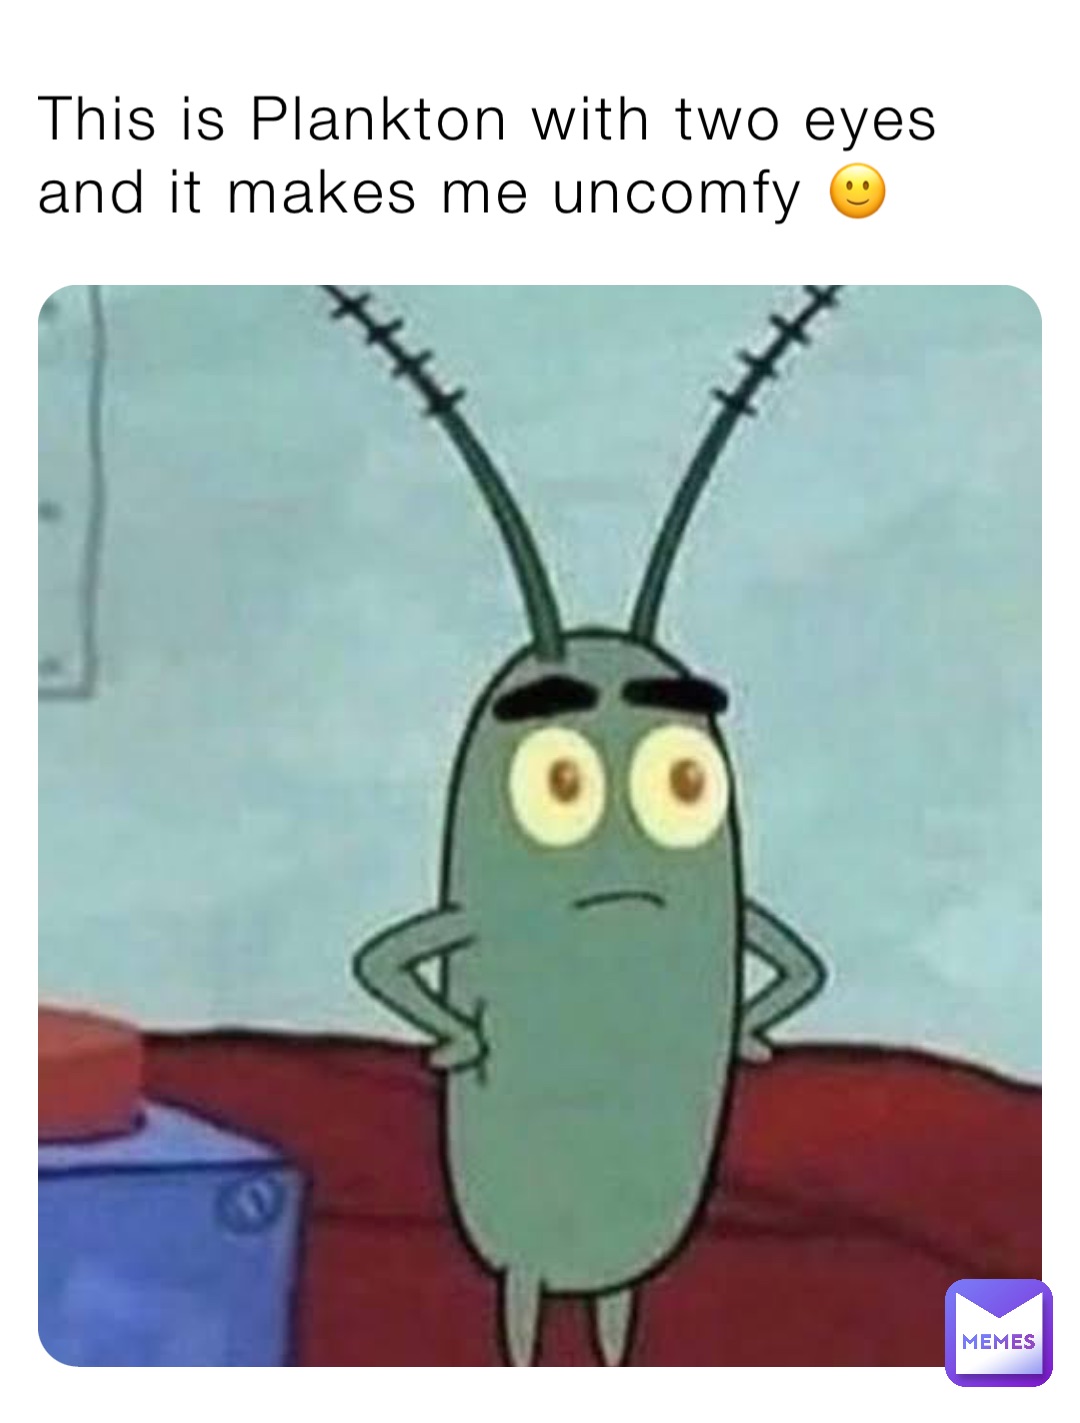 This is Plankton with two eyes and it makes me uncomfy 🙂